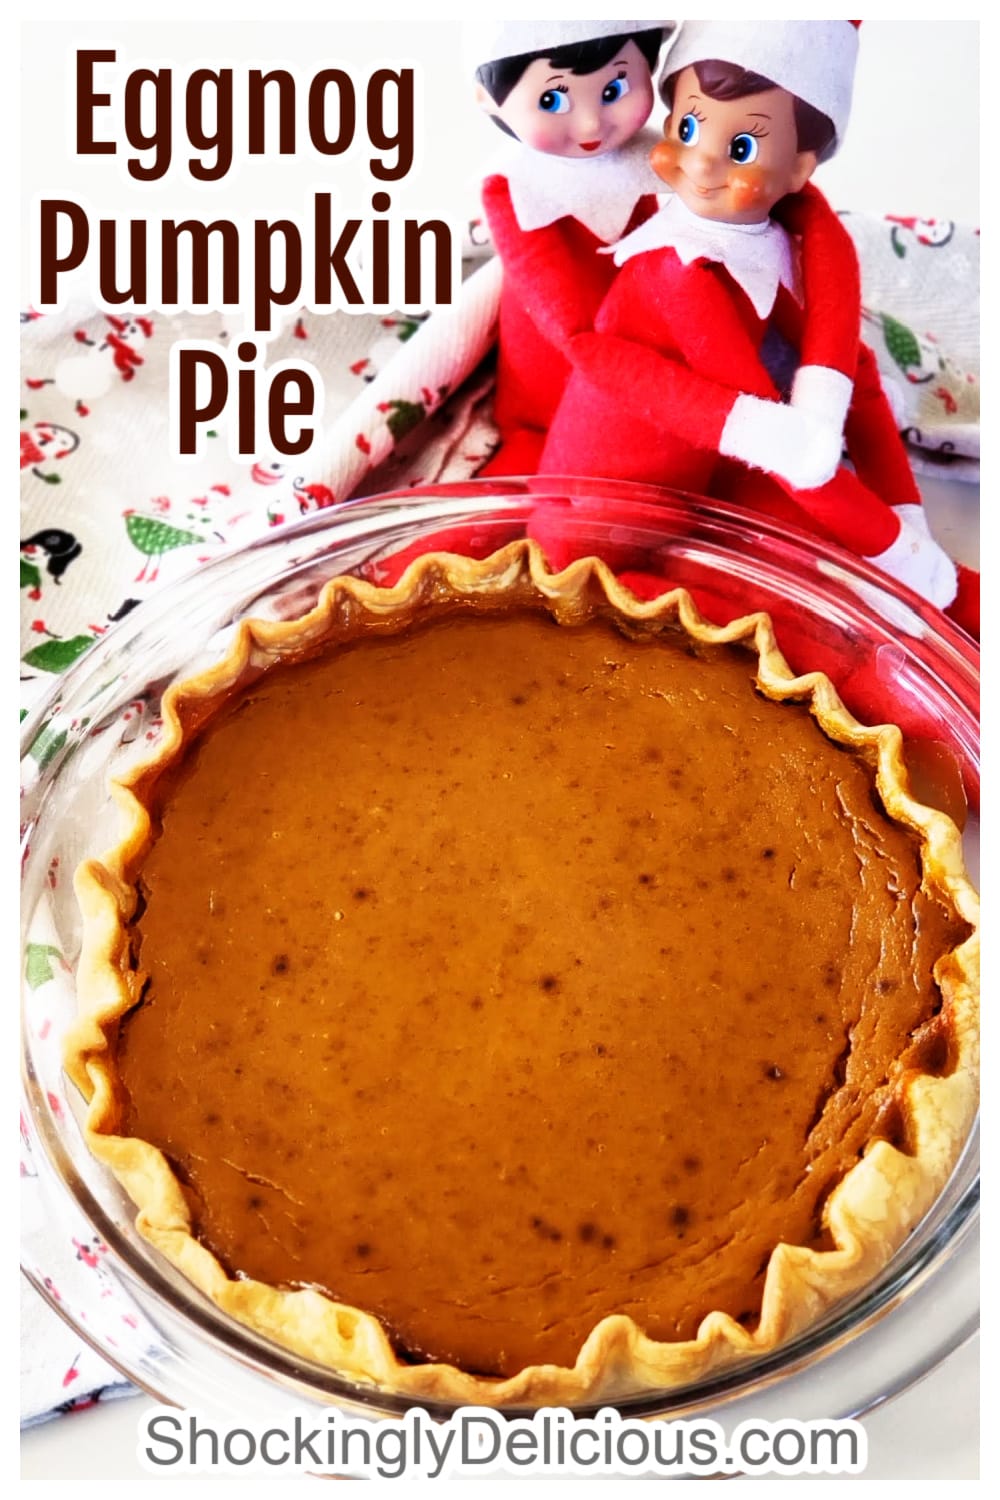 A whole Eggnog Pumpkin Pie in a glass pie dish with 2 Elves on the Shelf behind the pie, and recipe title superimposed 